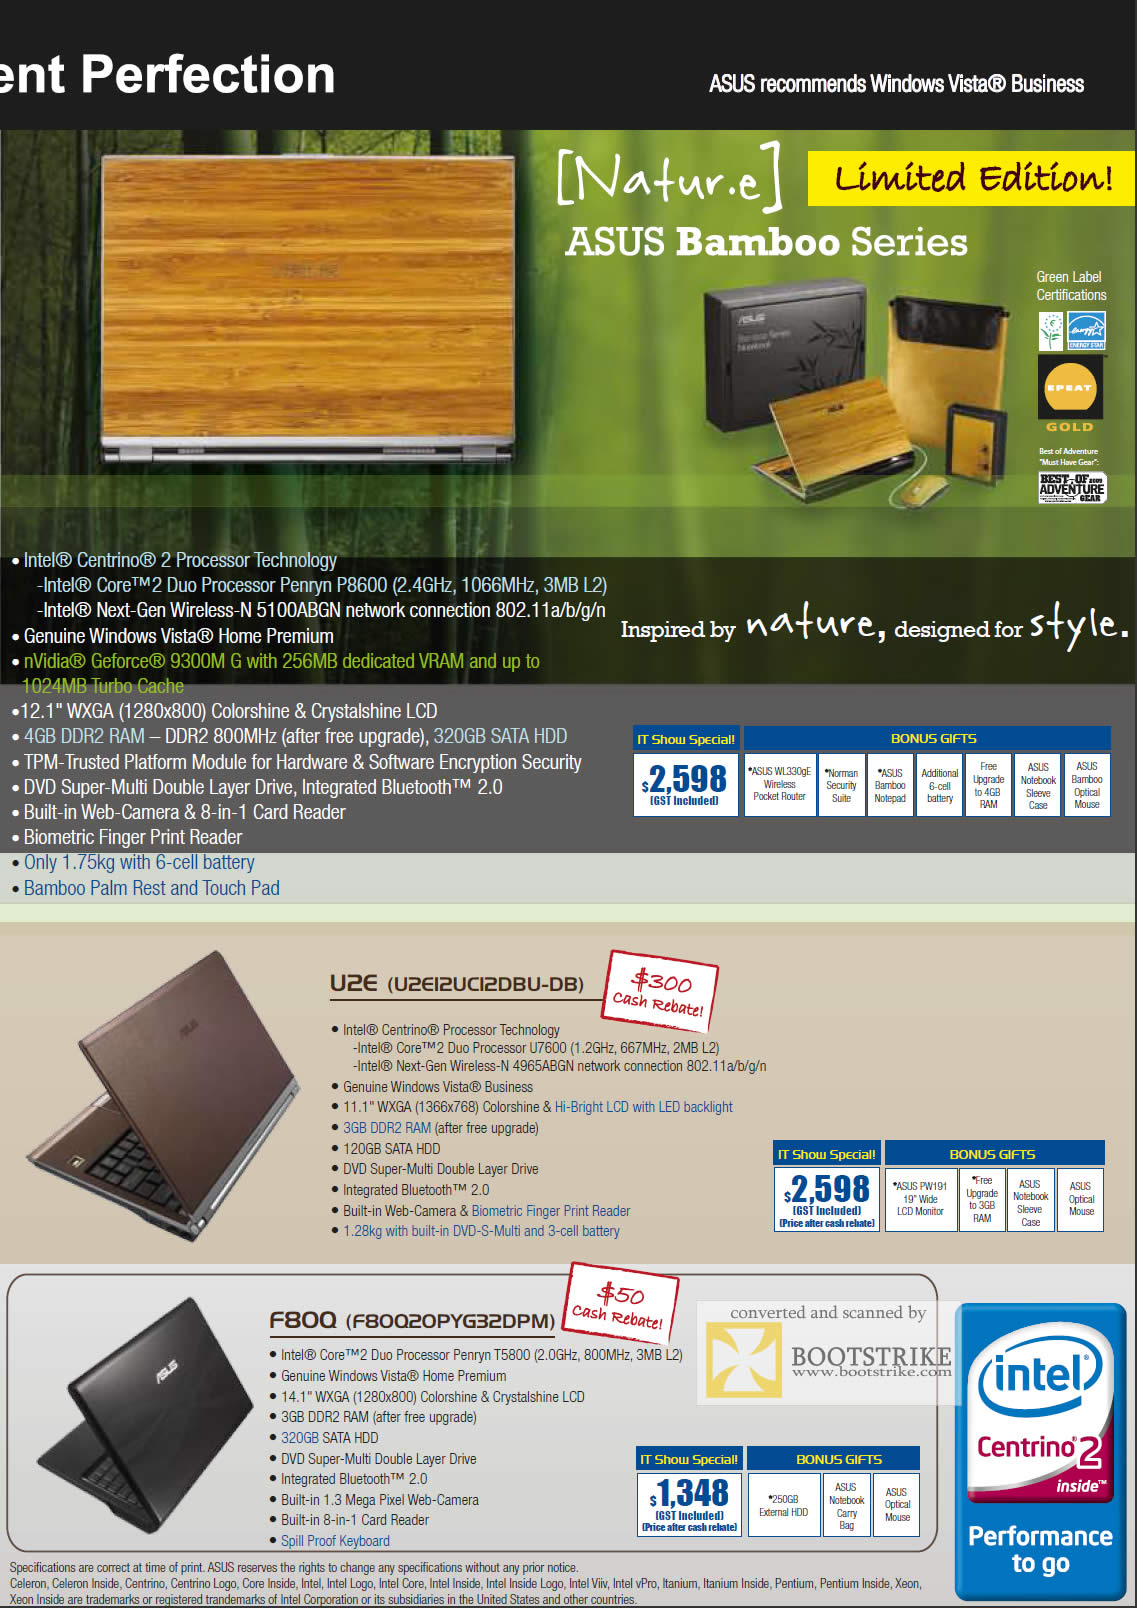 IT Show 2009 price list image brochure of ASUS Bamboo Series